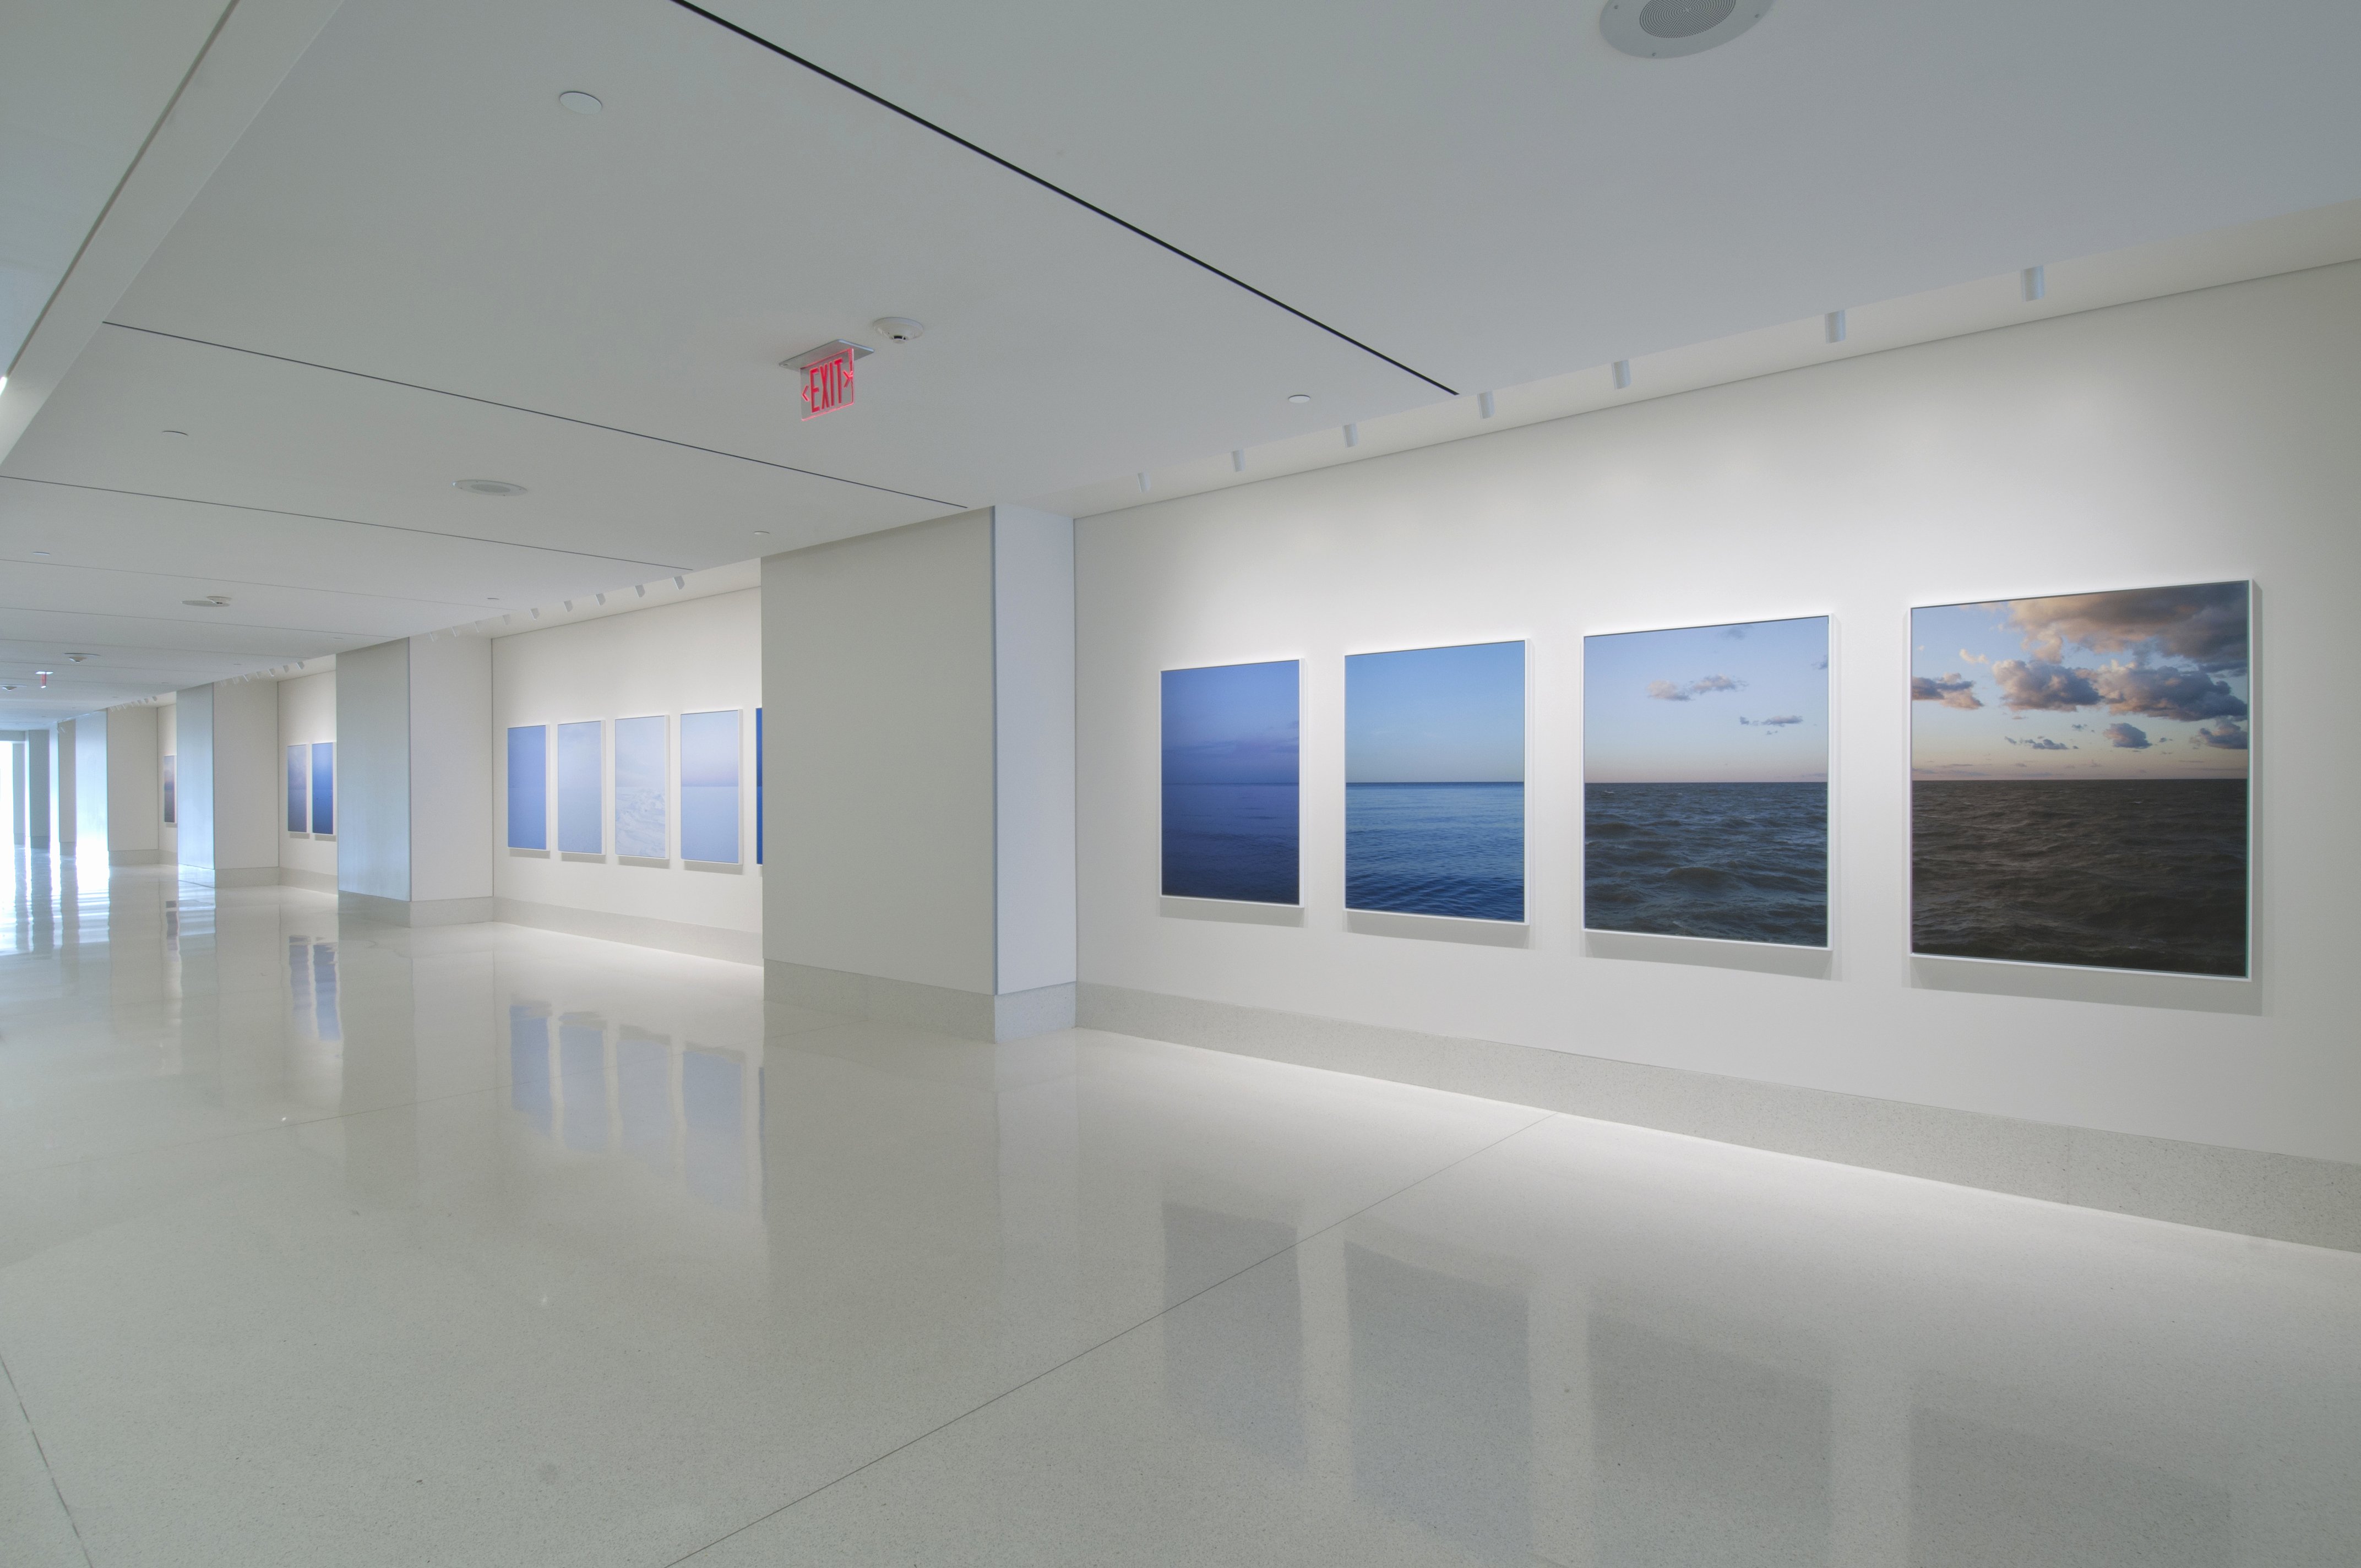 Cleveland Clinic Doctors Note Luxury “power Of Art” Showcases Cleveland Clinic’s Innovative Art